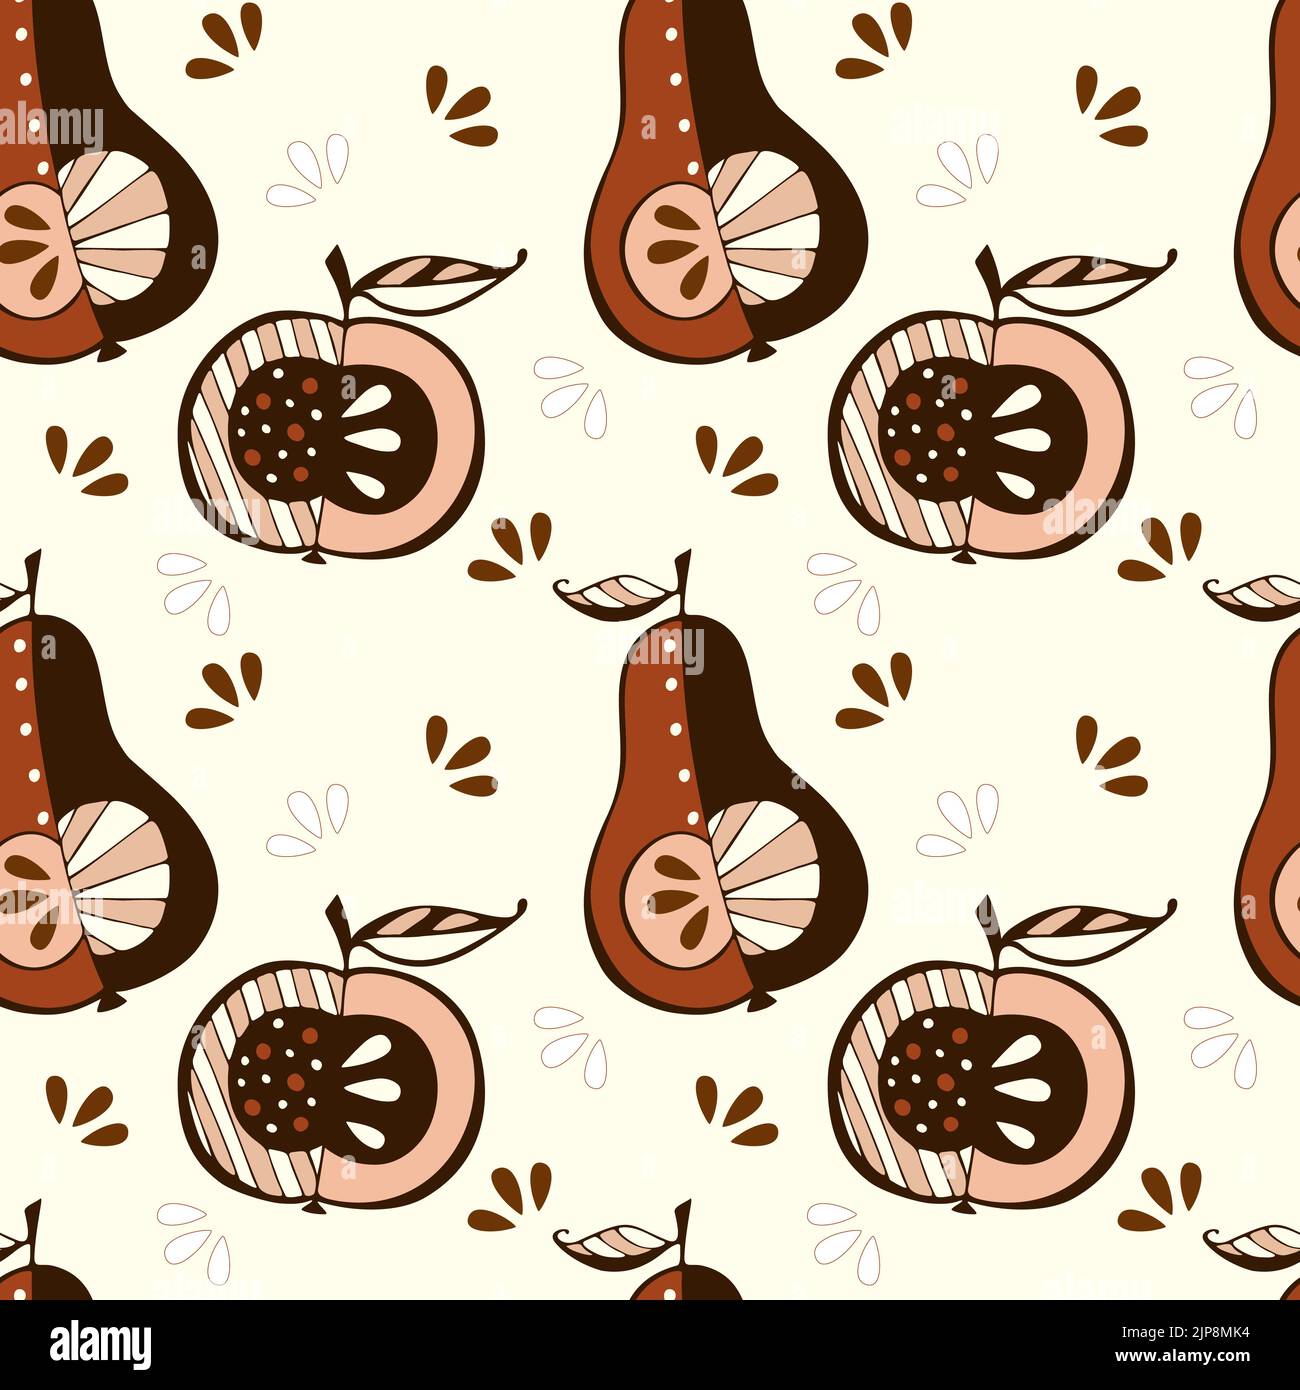 Apple and Pear pattern doodle hand drawn, brown autumn color. Vector illustration Stock Vector